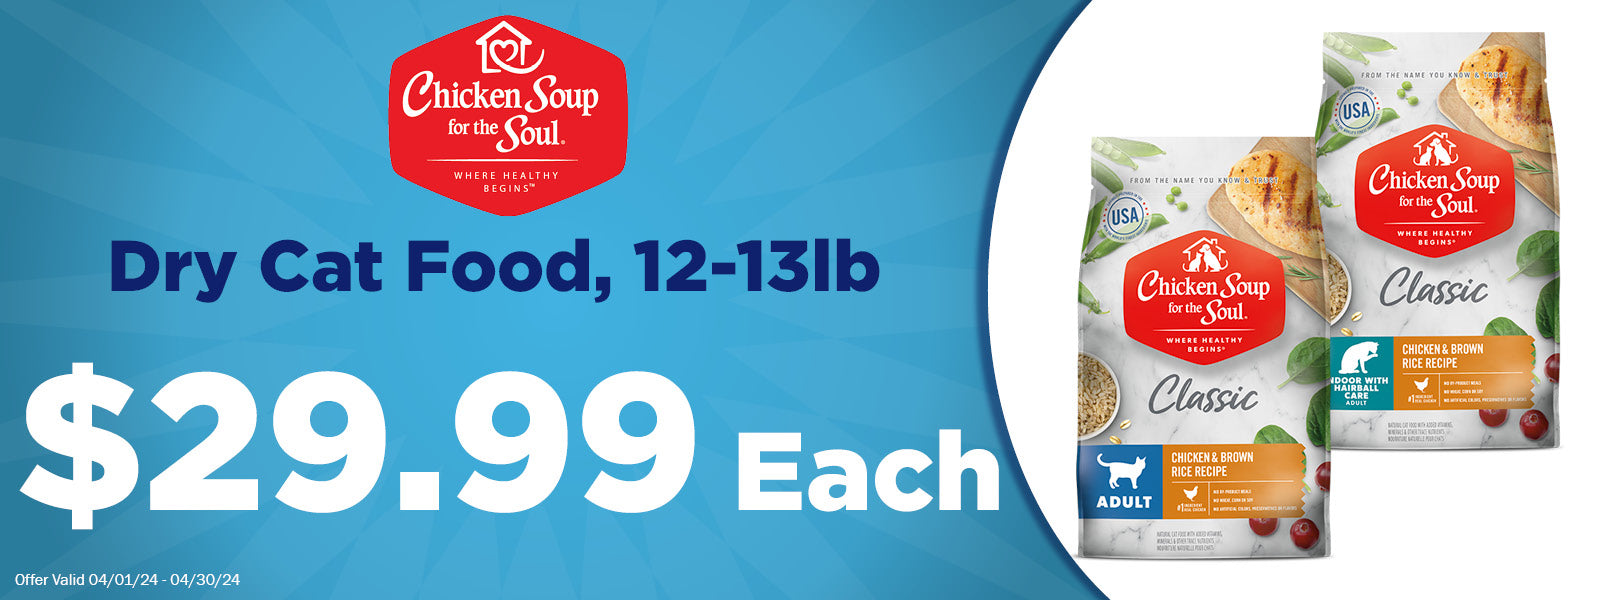 Chicken Soup for the Soul Dry Cat Food 12lb+ $29.99